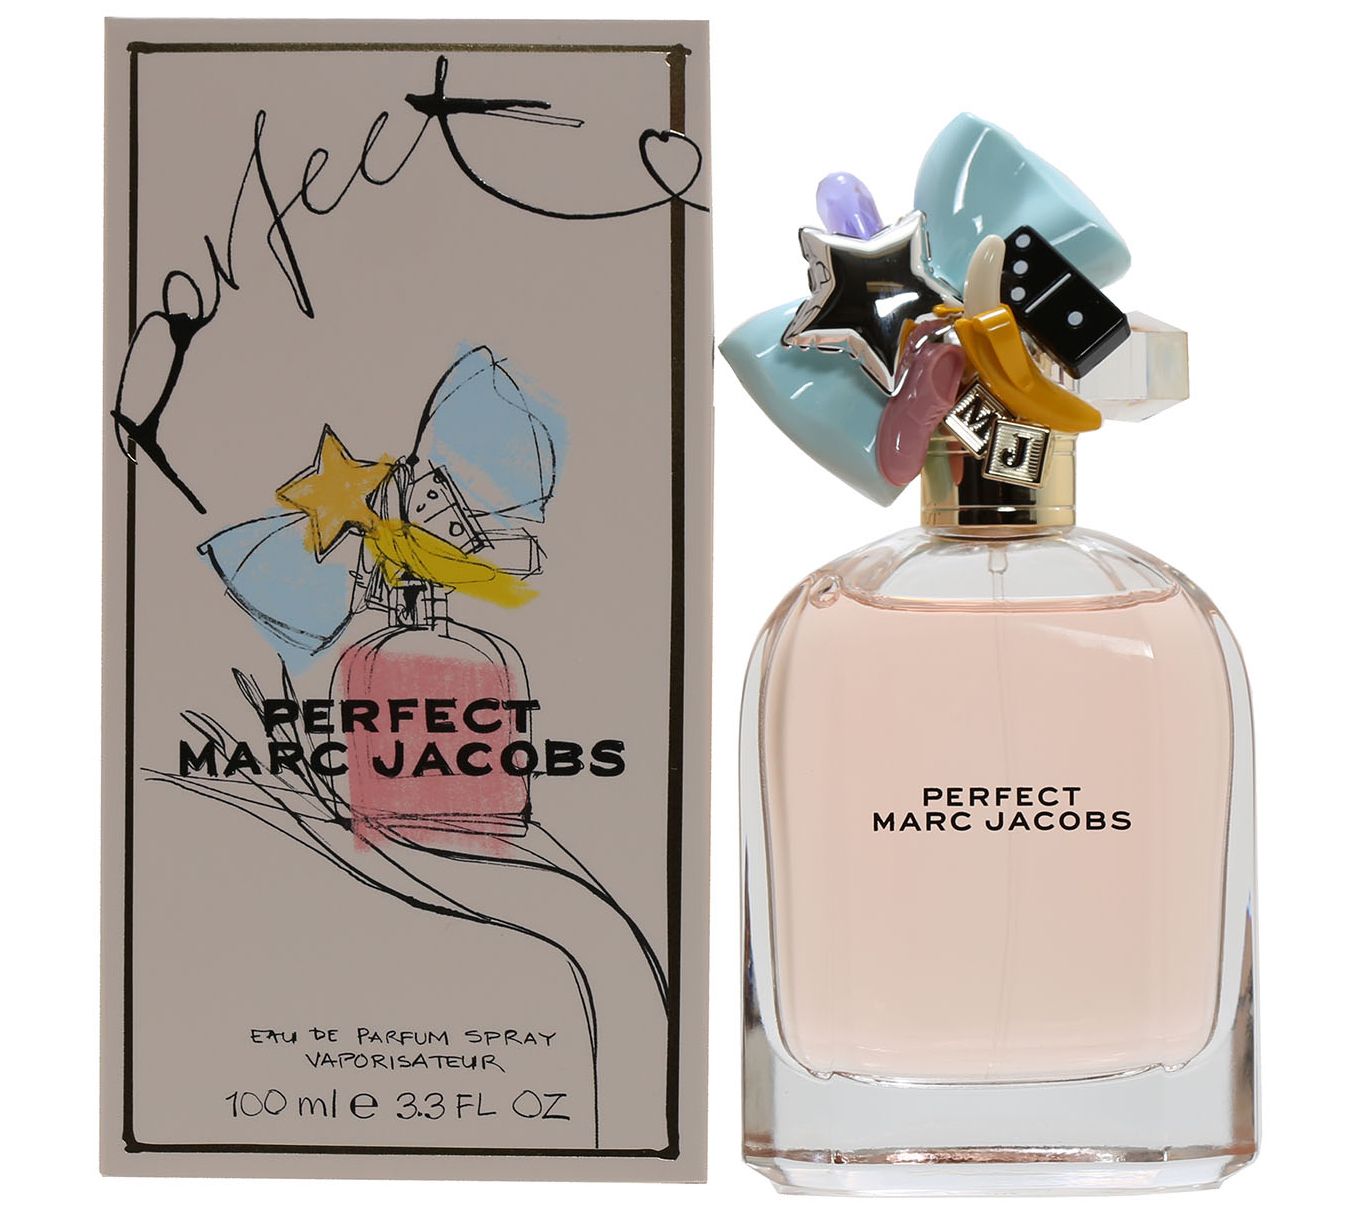 An Honest Review of Marc Jacobs Perfect Perfume